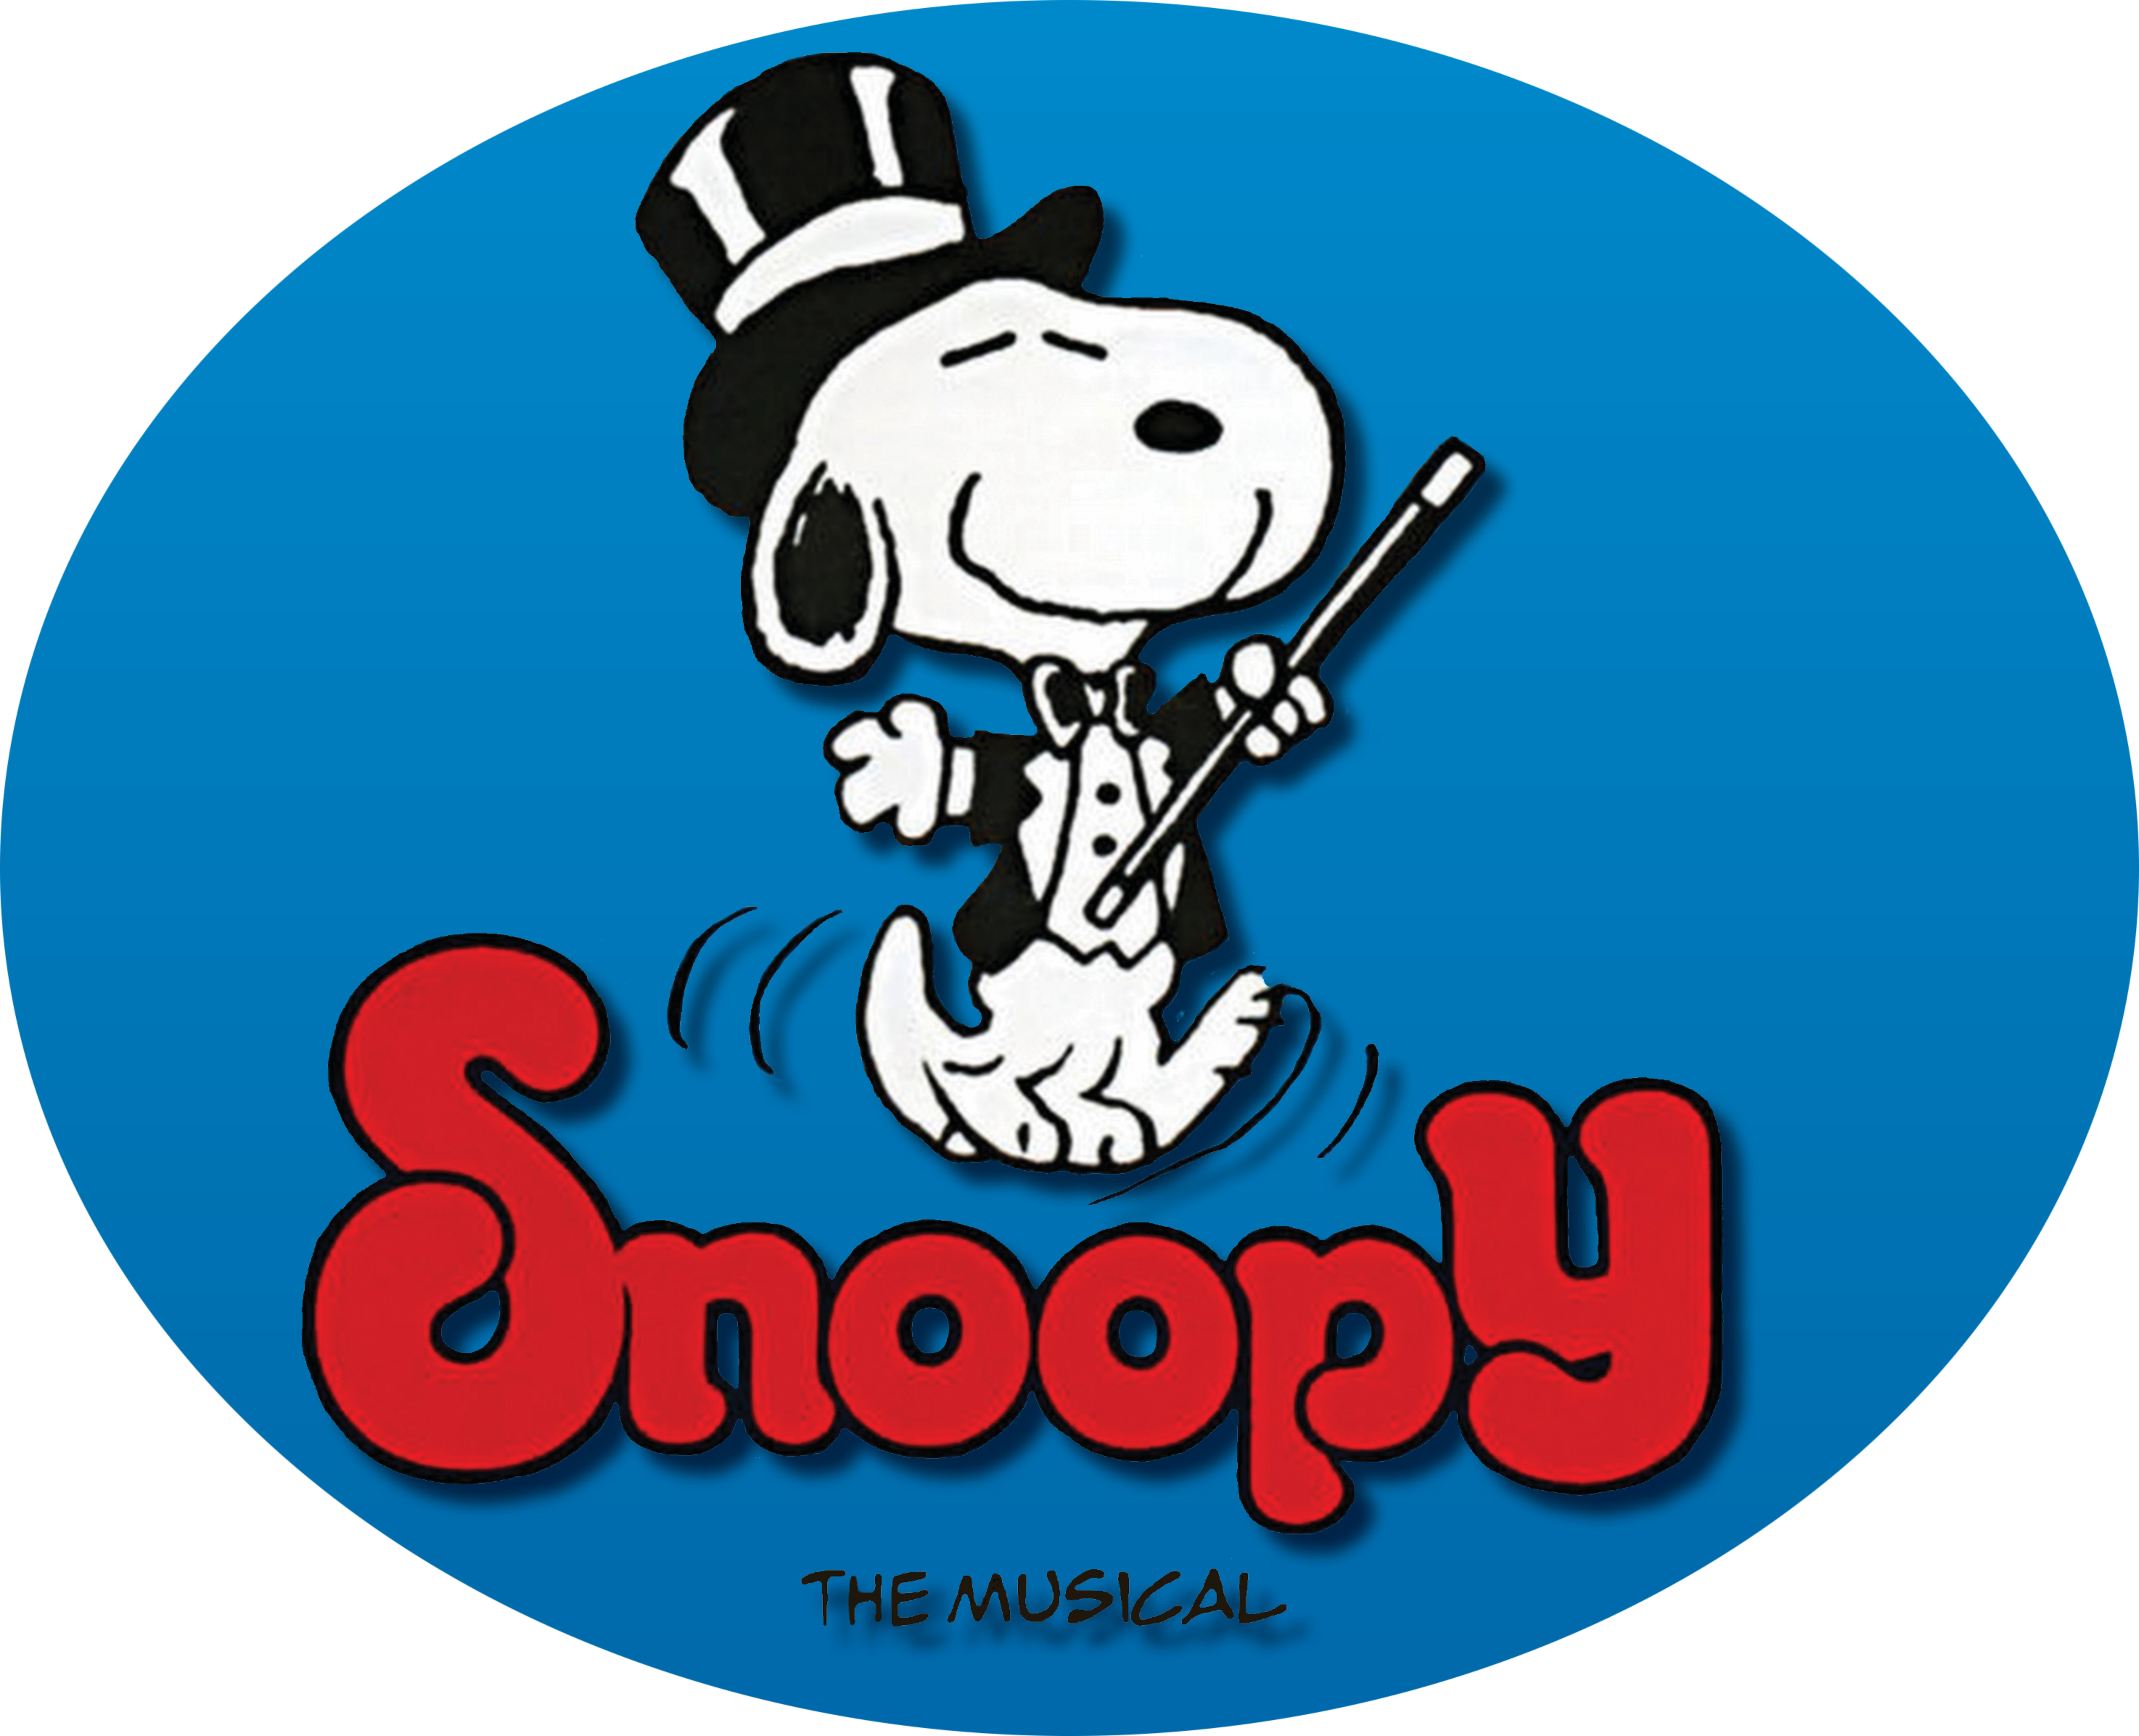 Snoopy: The Musical (1 DVD Box Set)